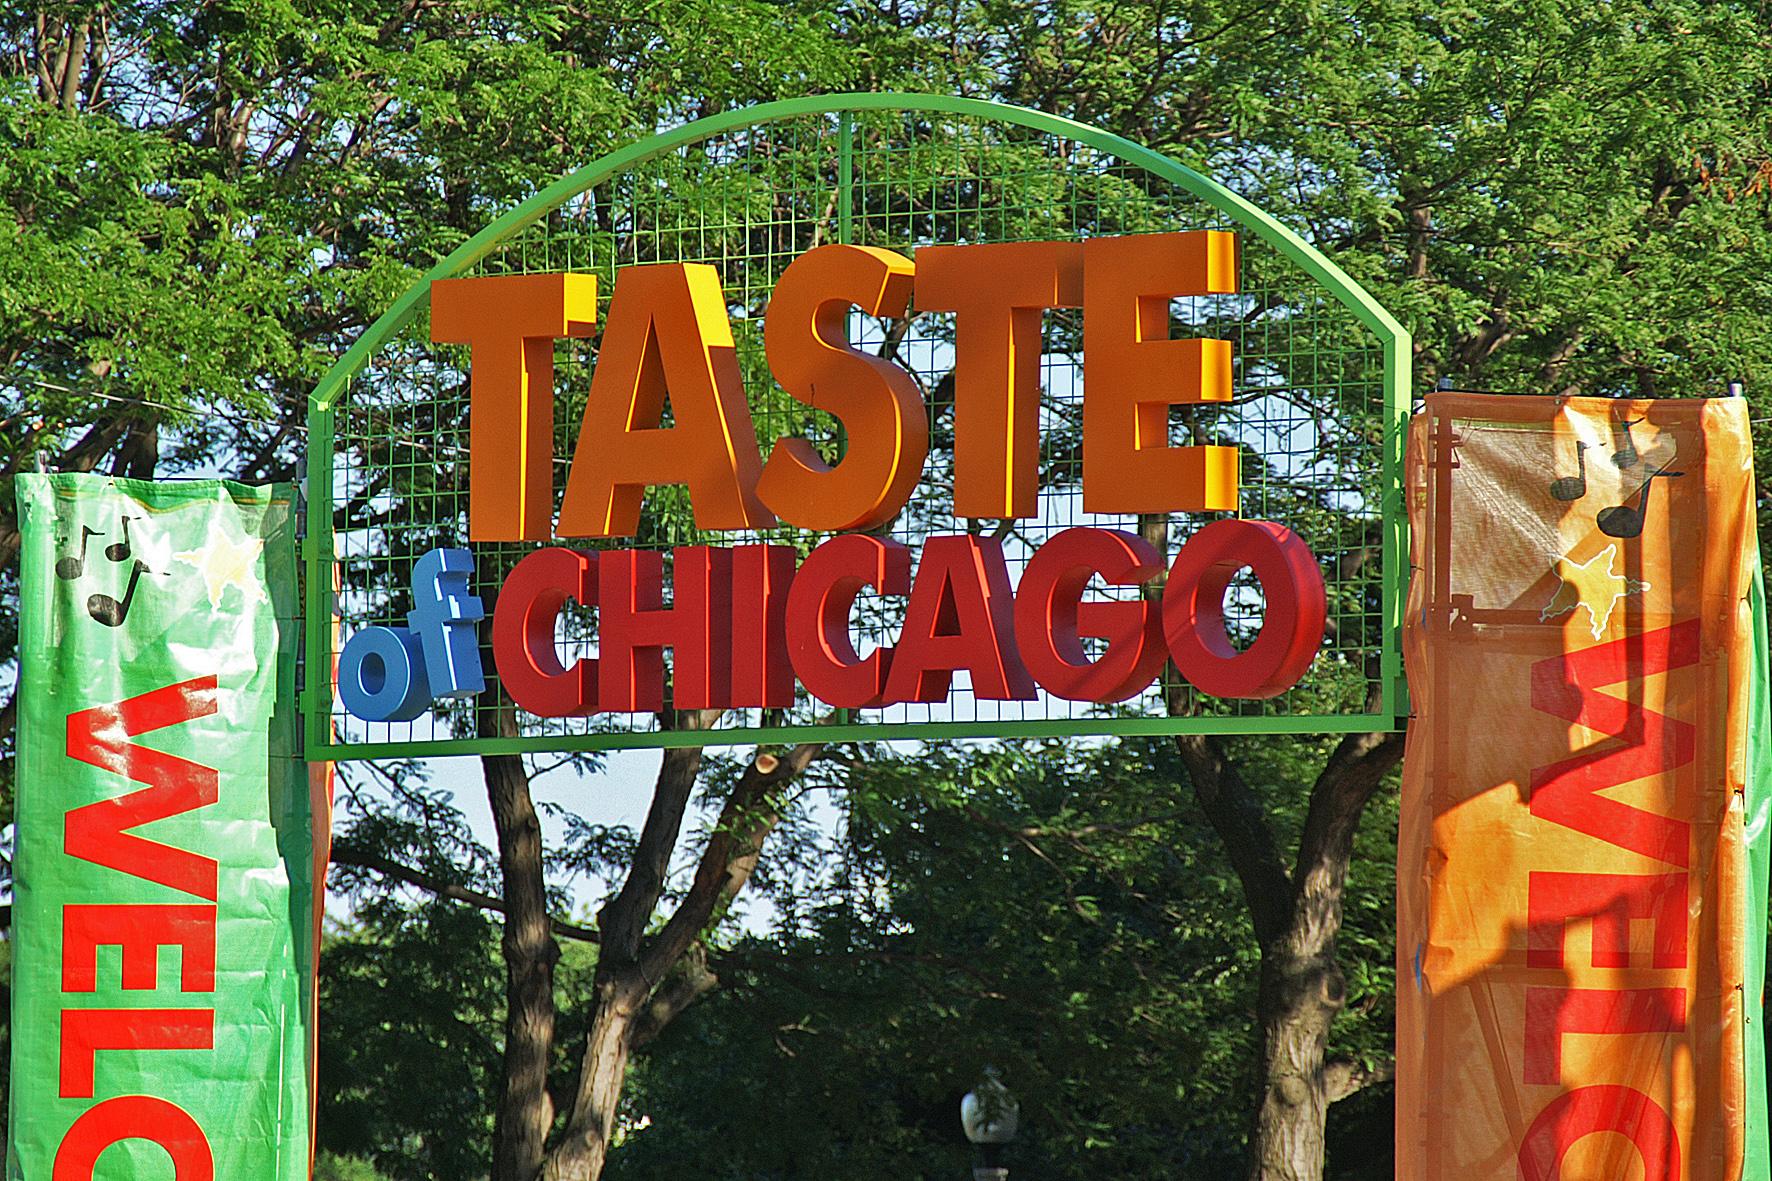 The Taste of Chicago may be the granddaddy of local food fests, but it was not the city’s first. (Peter F. / Flickr)